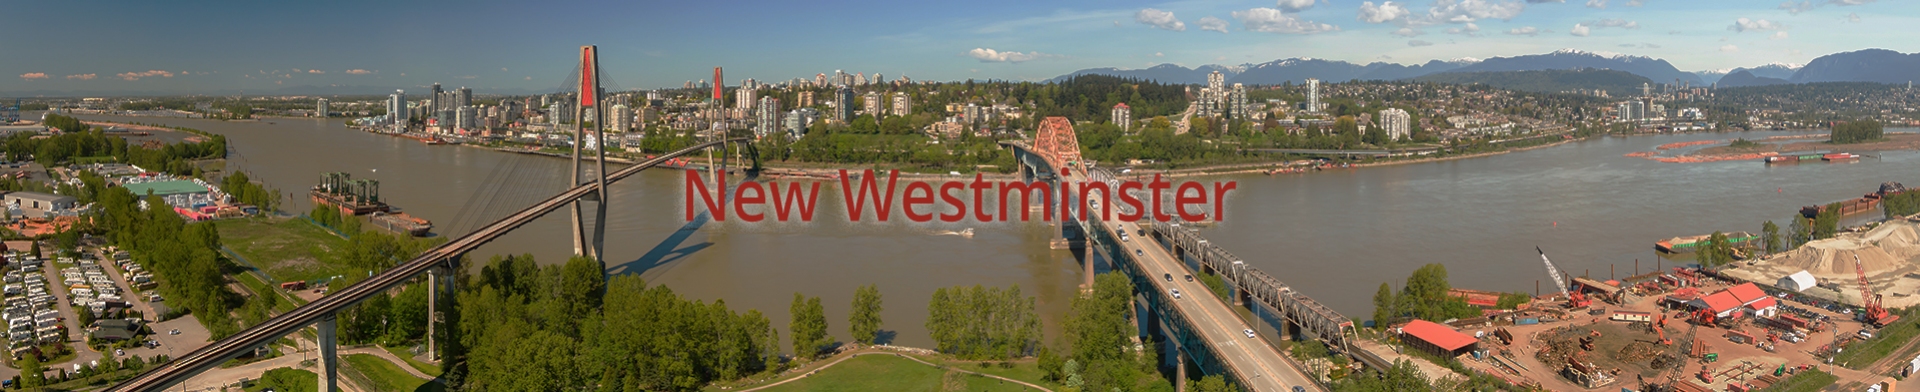 New Westminster Notary Public